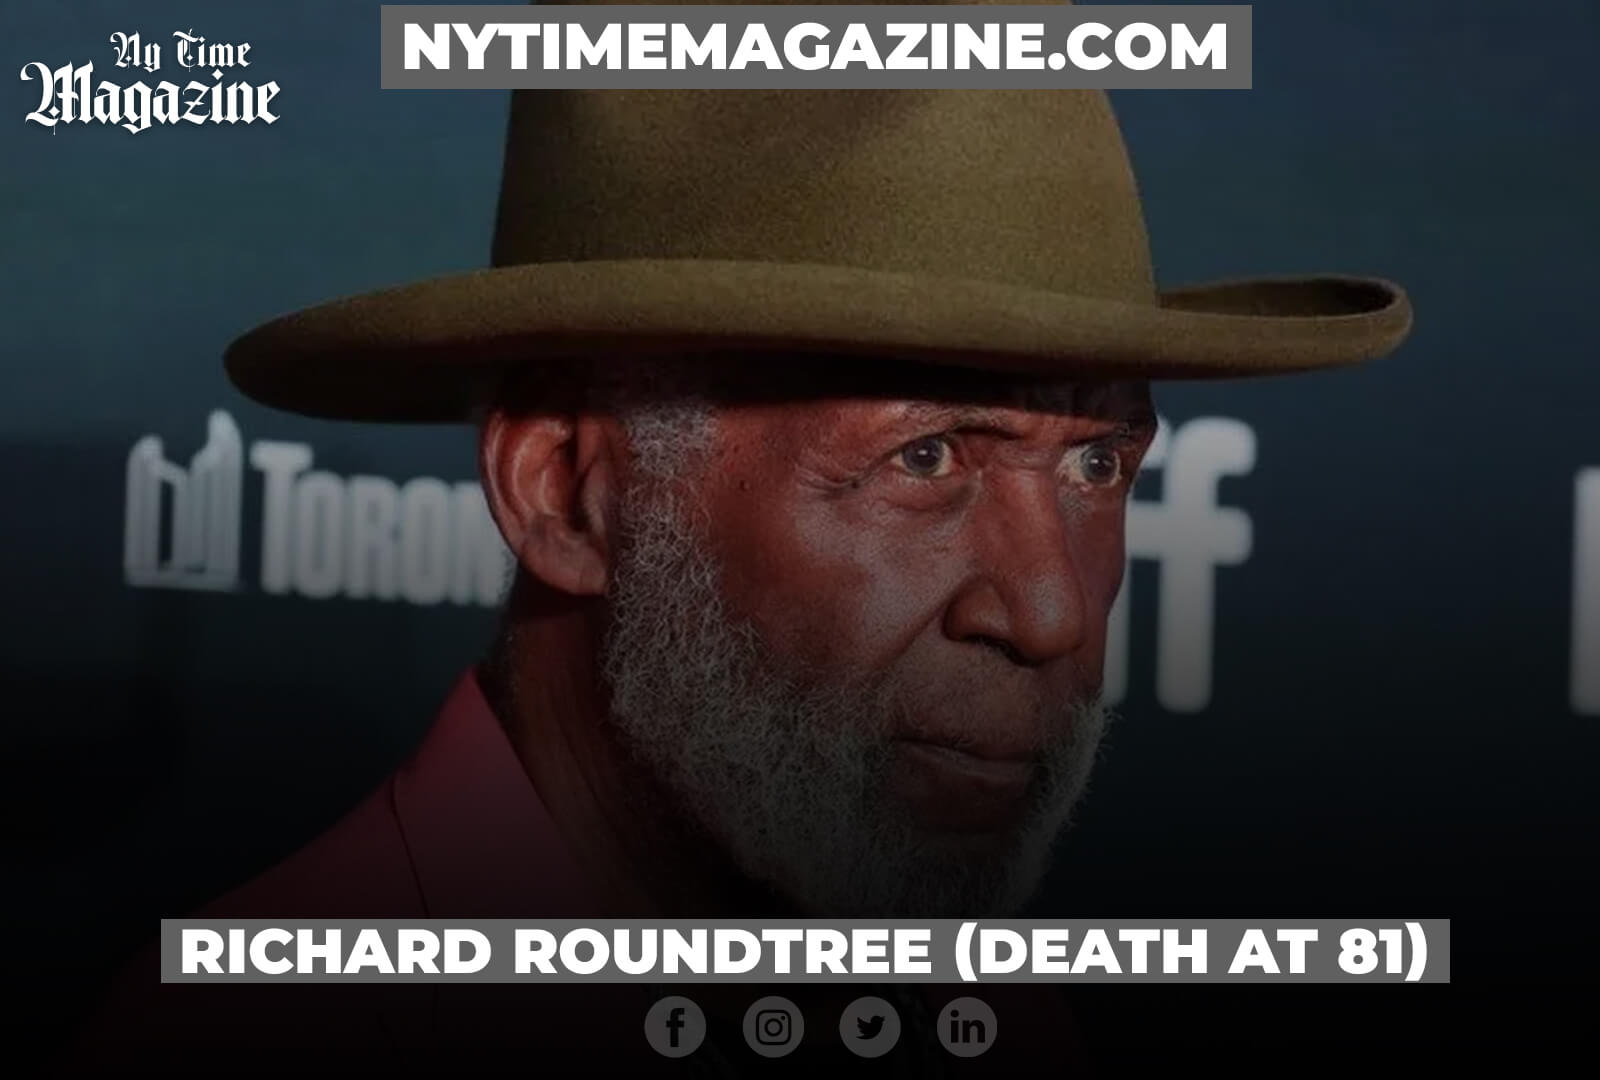 Richard Roundtree, A Pioneer in Film History. (Death at 81)